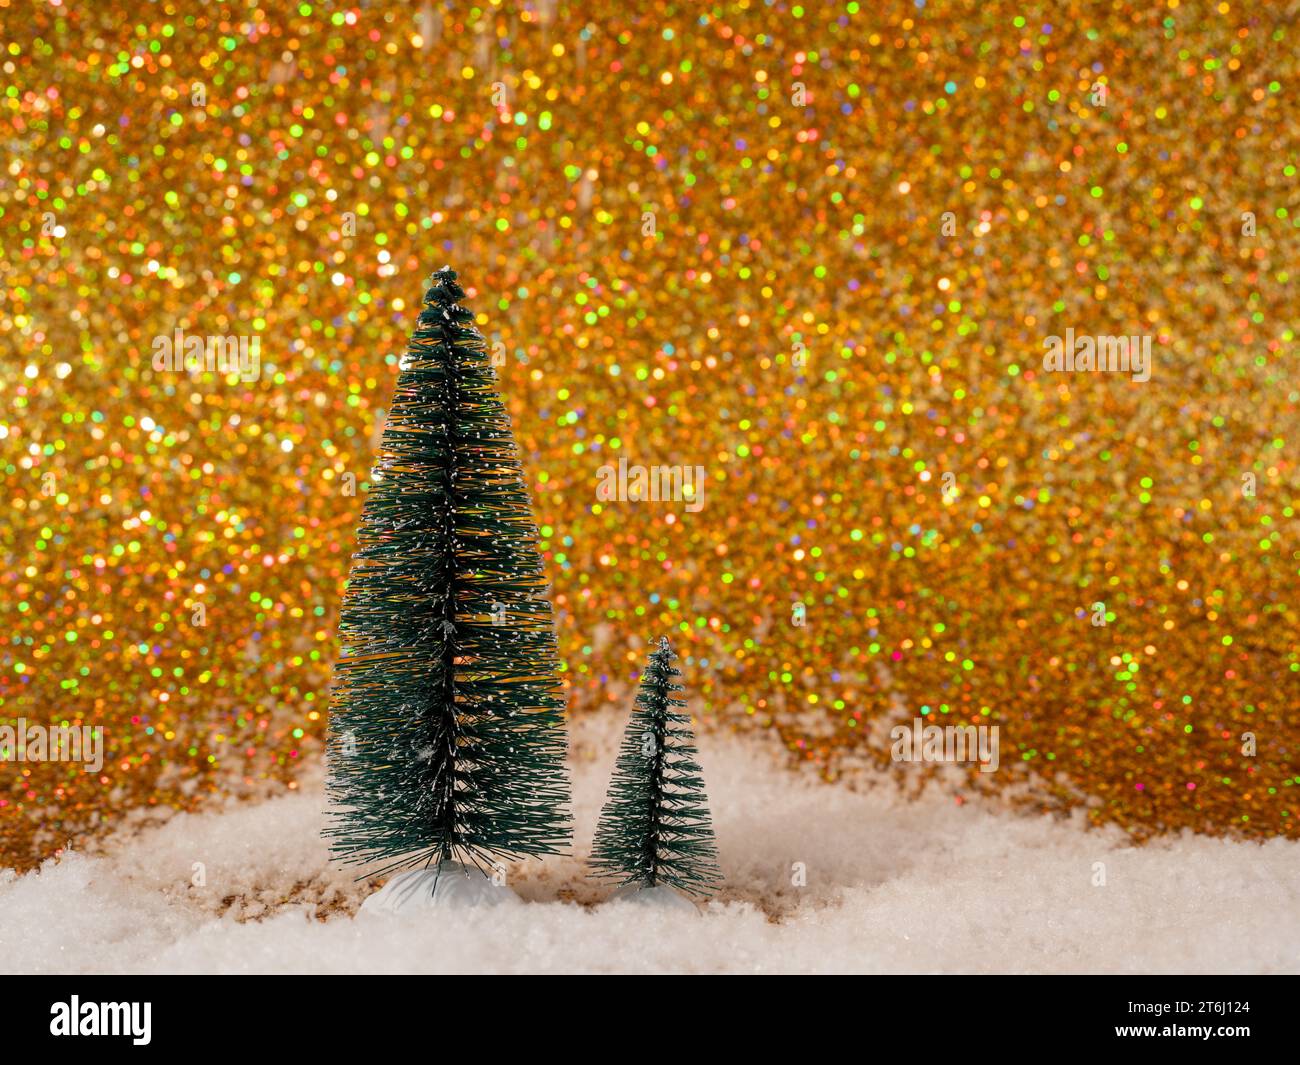 The photo shows a festive scene with decorative artificial Christmas trees set on shiny white snow. The backdrop features a shimmering gold backdrop t Stock Photo